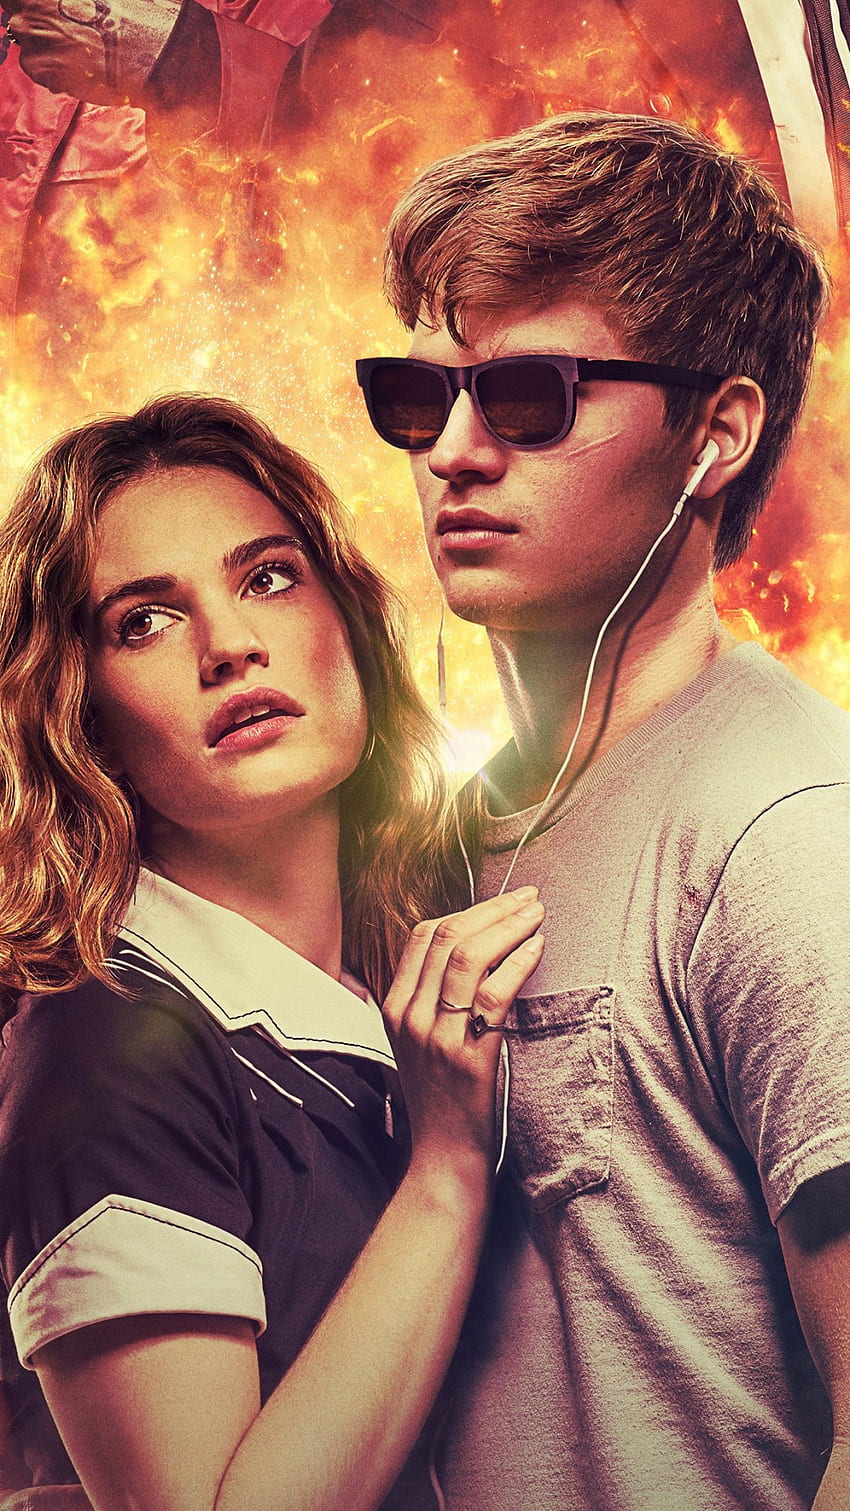 Baby Driver, Ansel Elgort, Lily James für iPhone 8, iPhone 7 Plus, iPhone 6+, Sony Xperia Z, HTC One, Baby Driver iPhone HD-Handy-Hintergrundbild